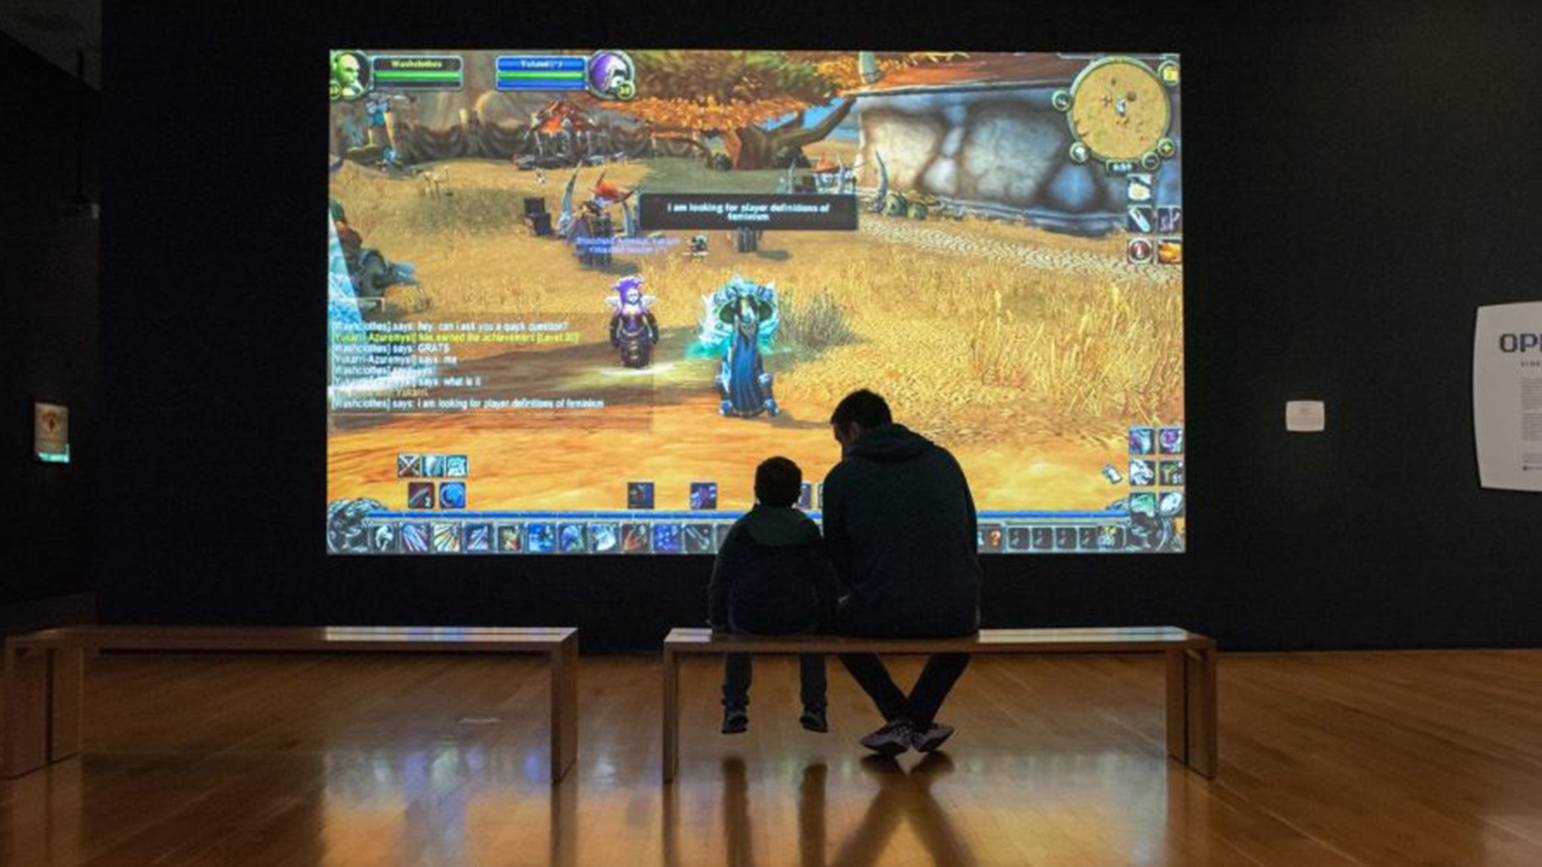 A child and adult sitting on a bench looking at a projection of the video game "World of Warcraft"